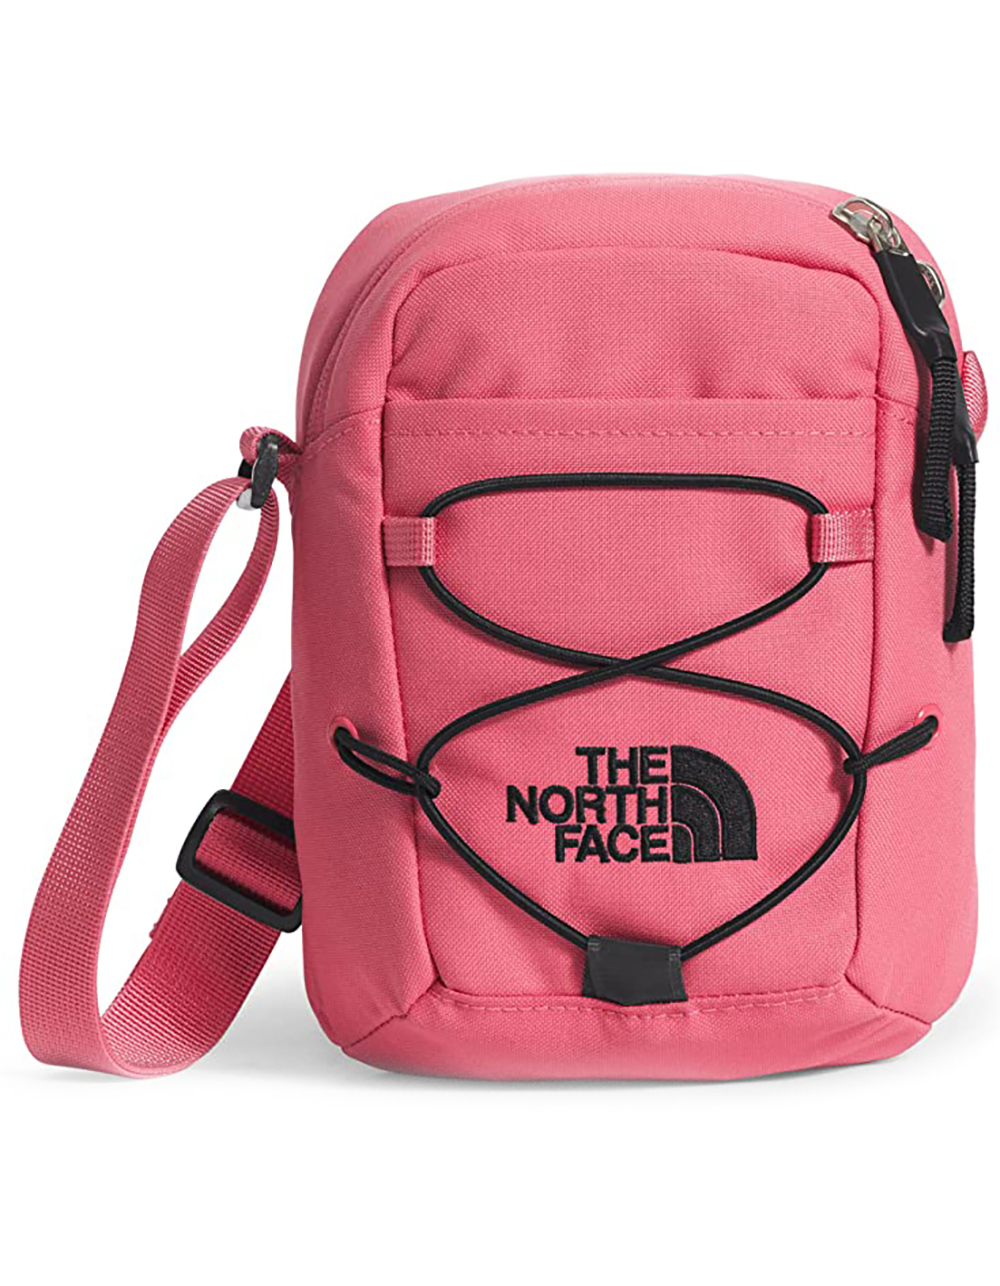 The North Face Jester Crossbody Bag for Women in Black